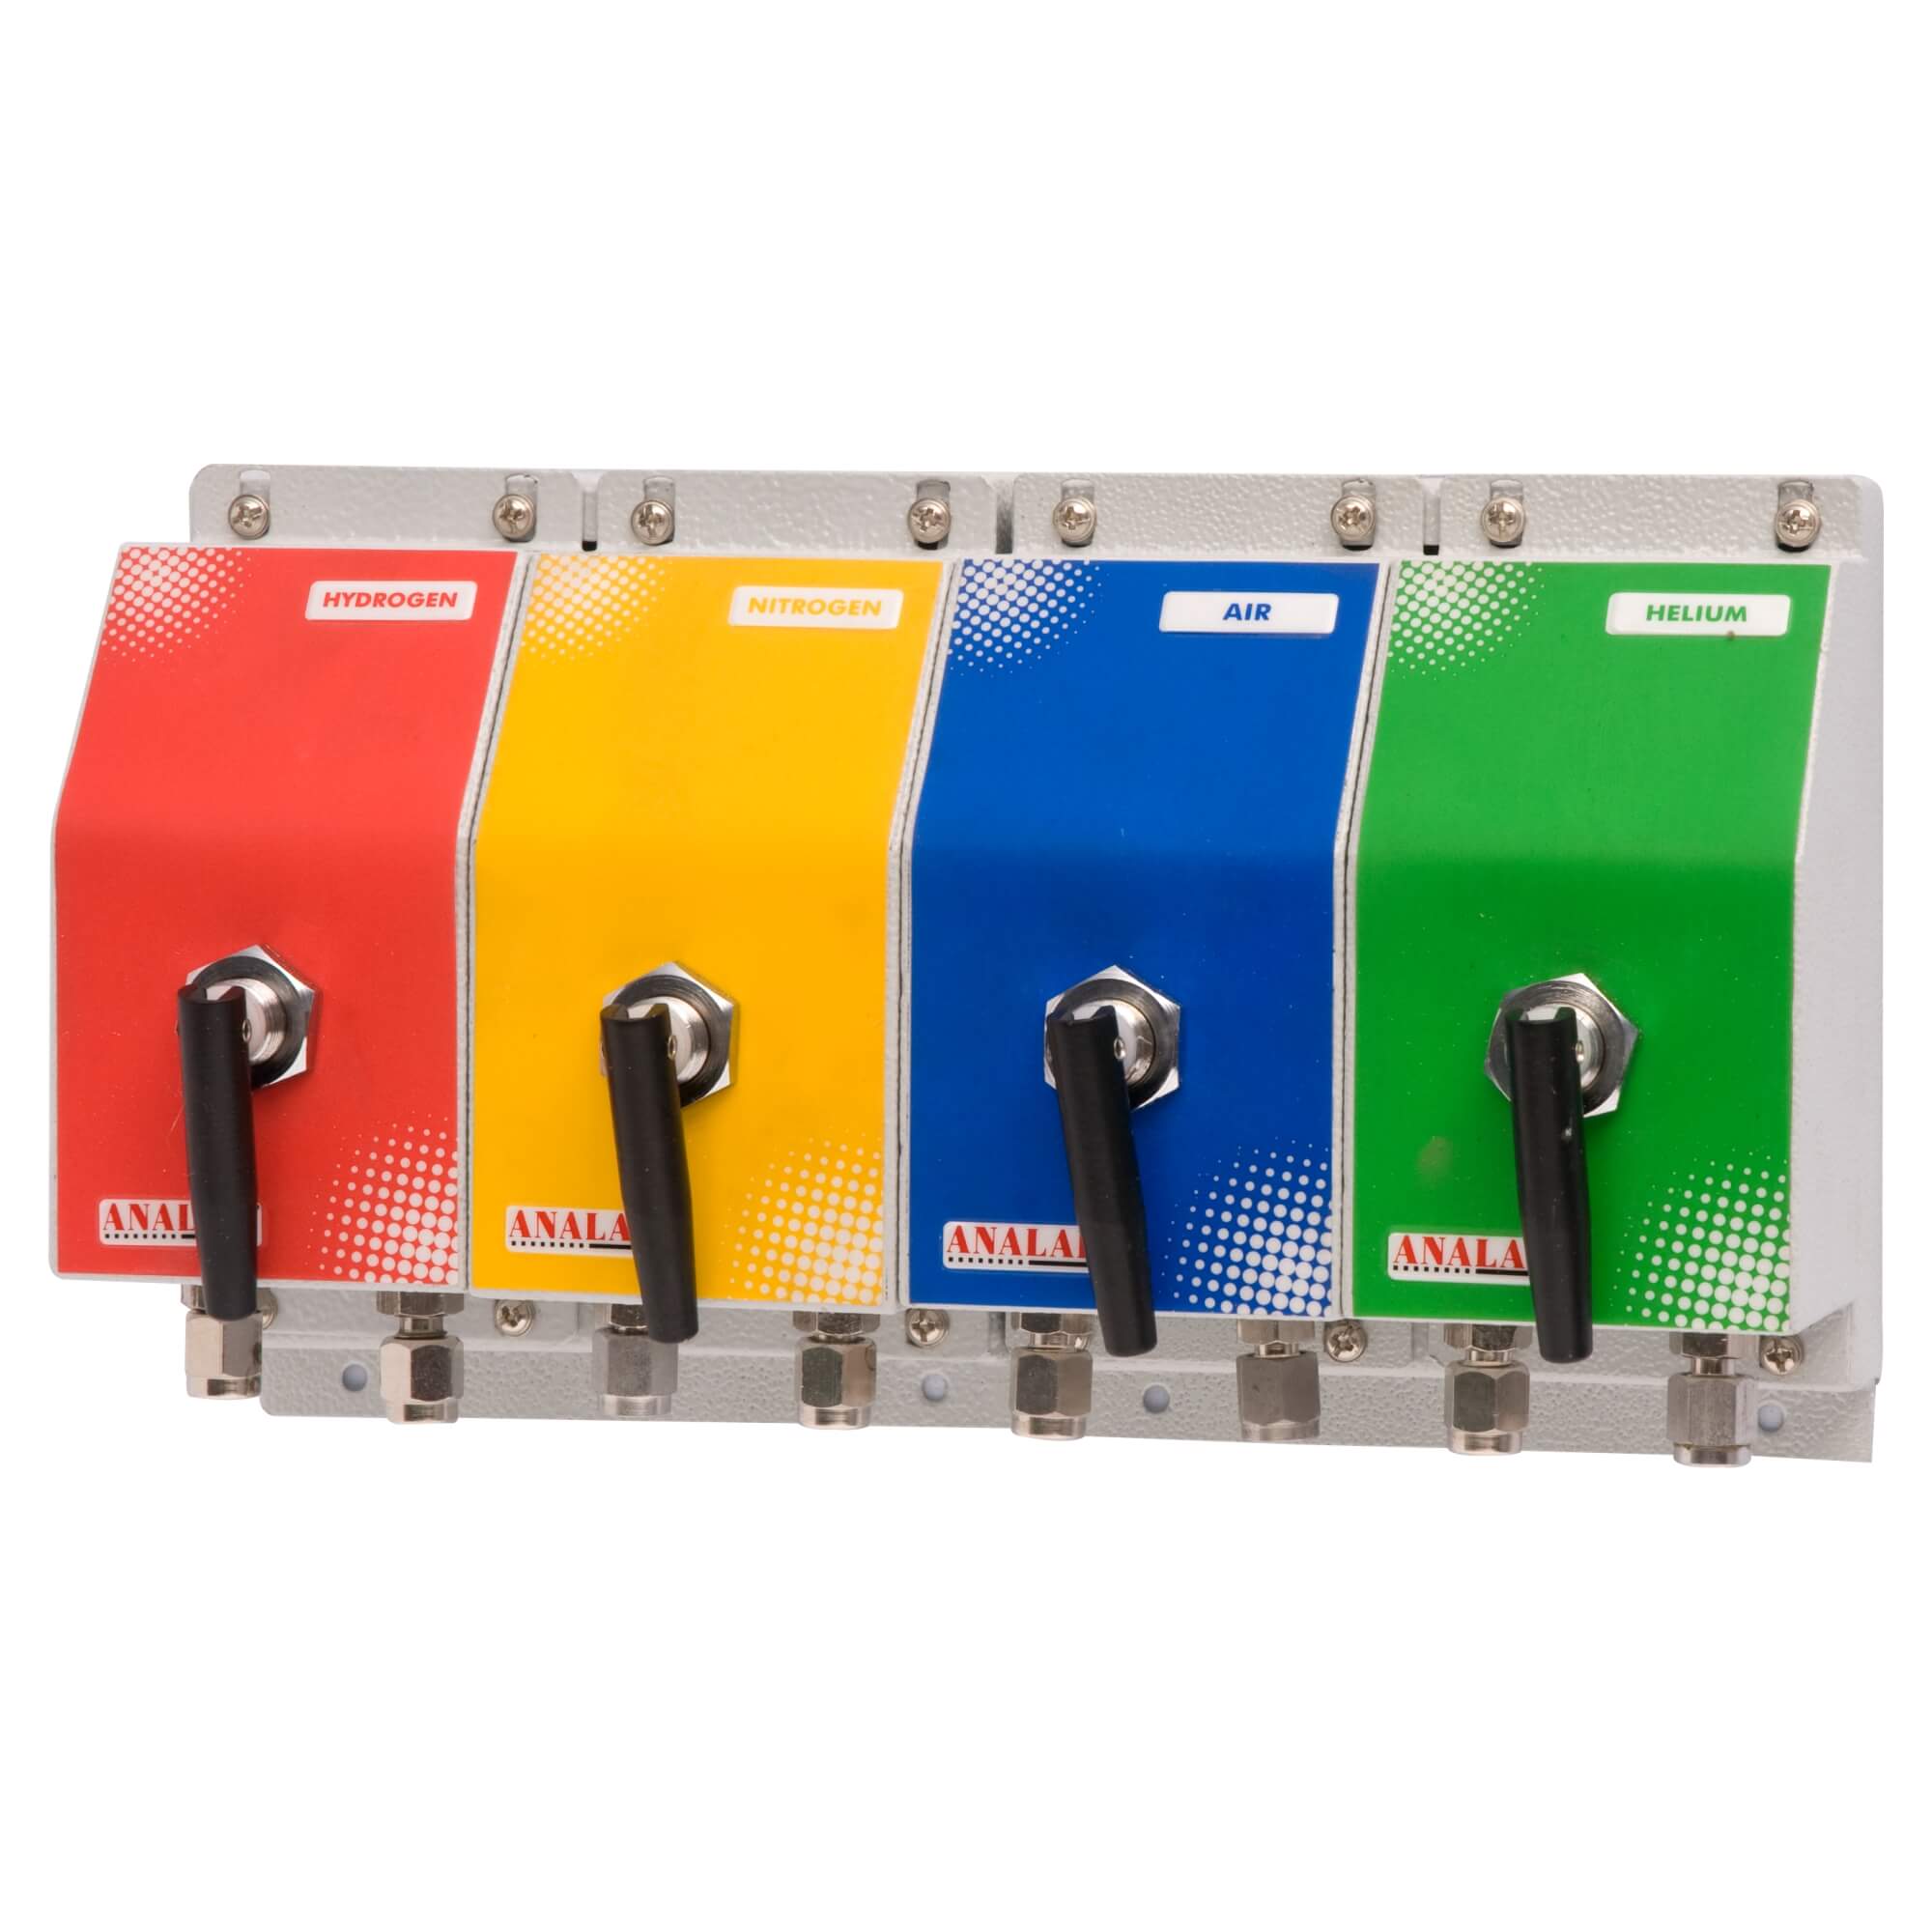 Gas Control Module / Ministation Manufacturer in India